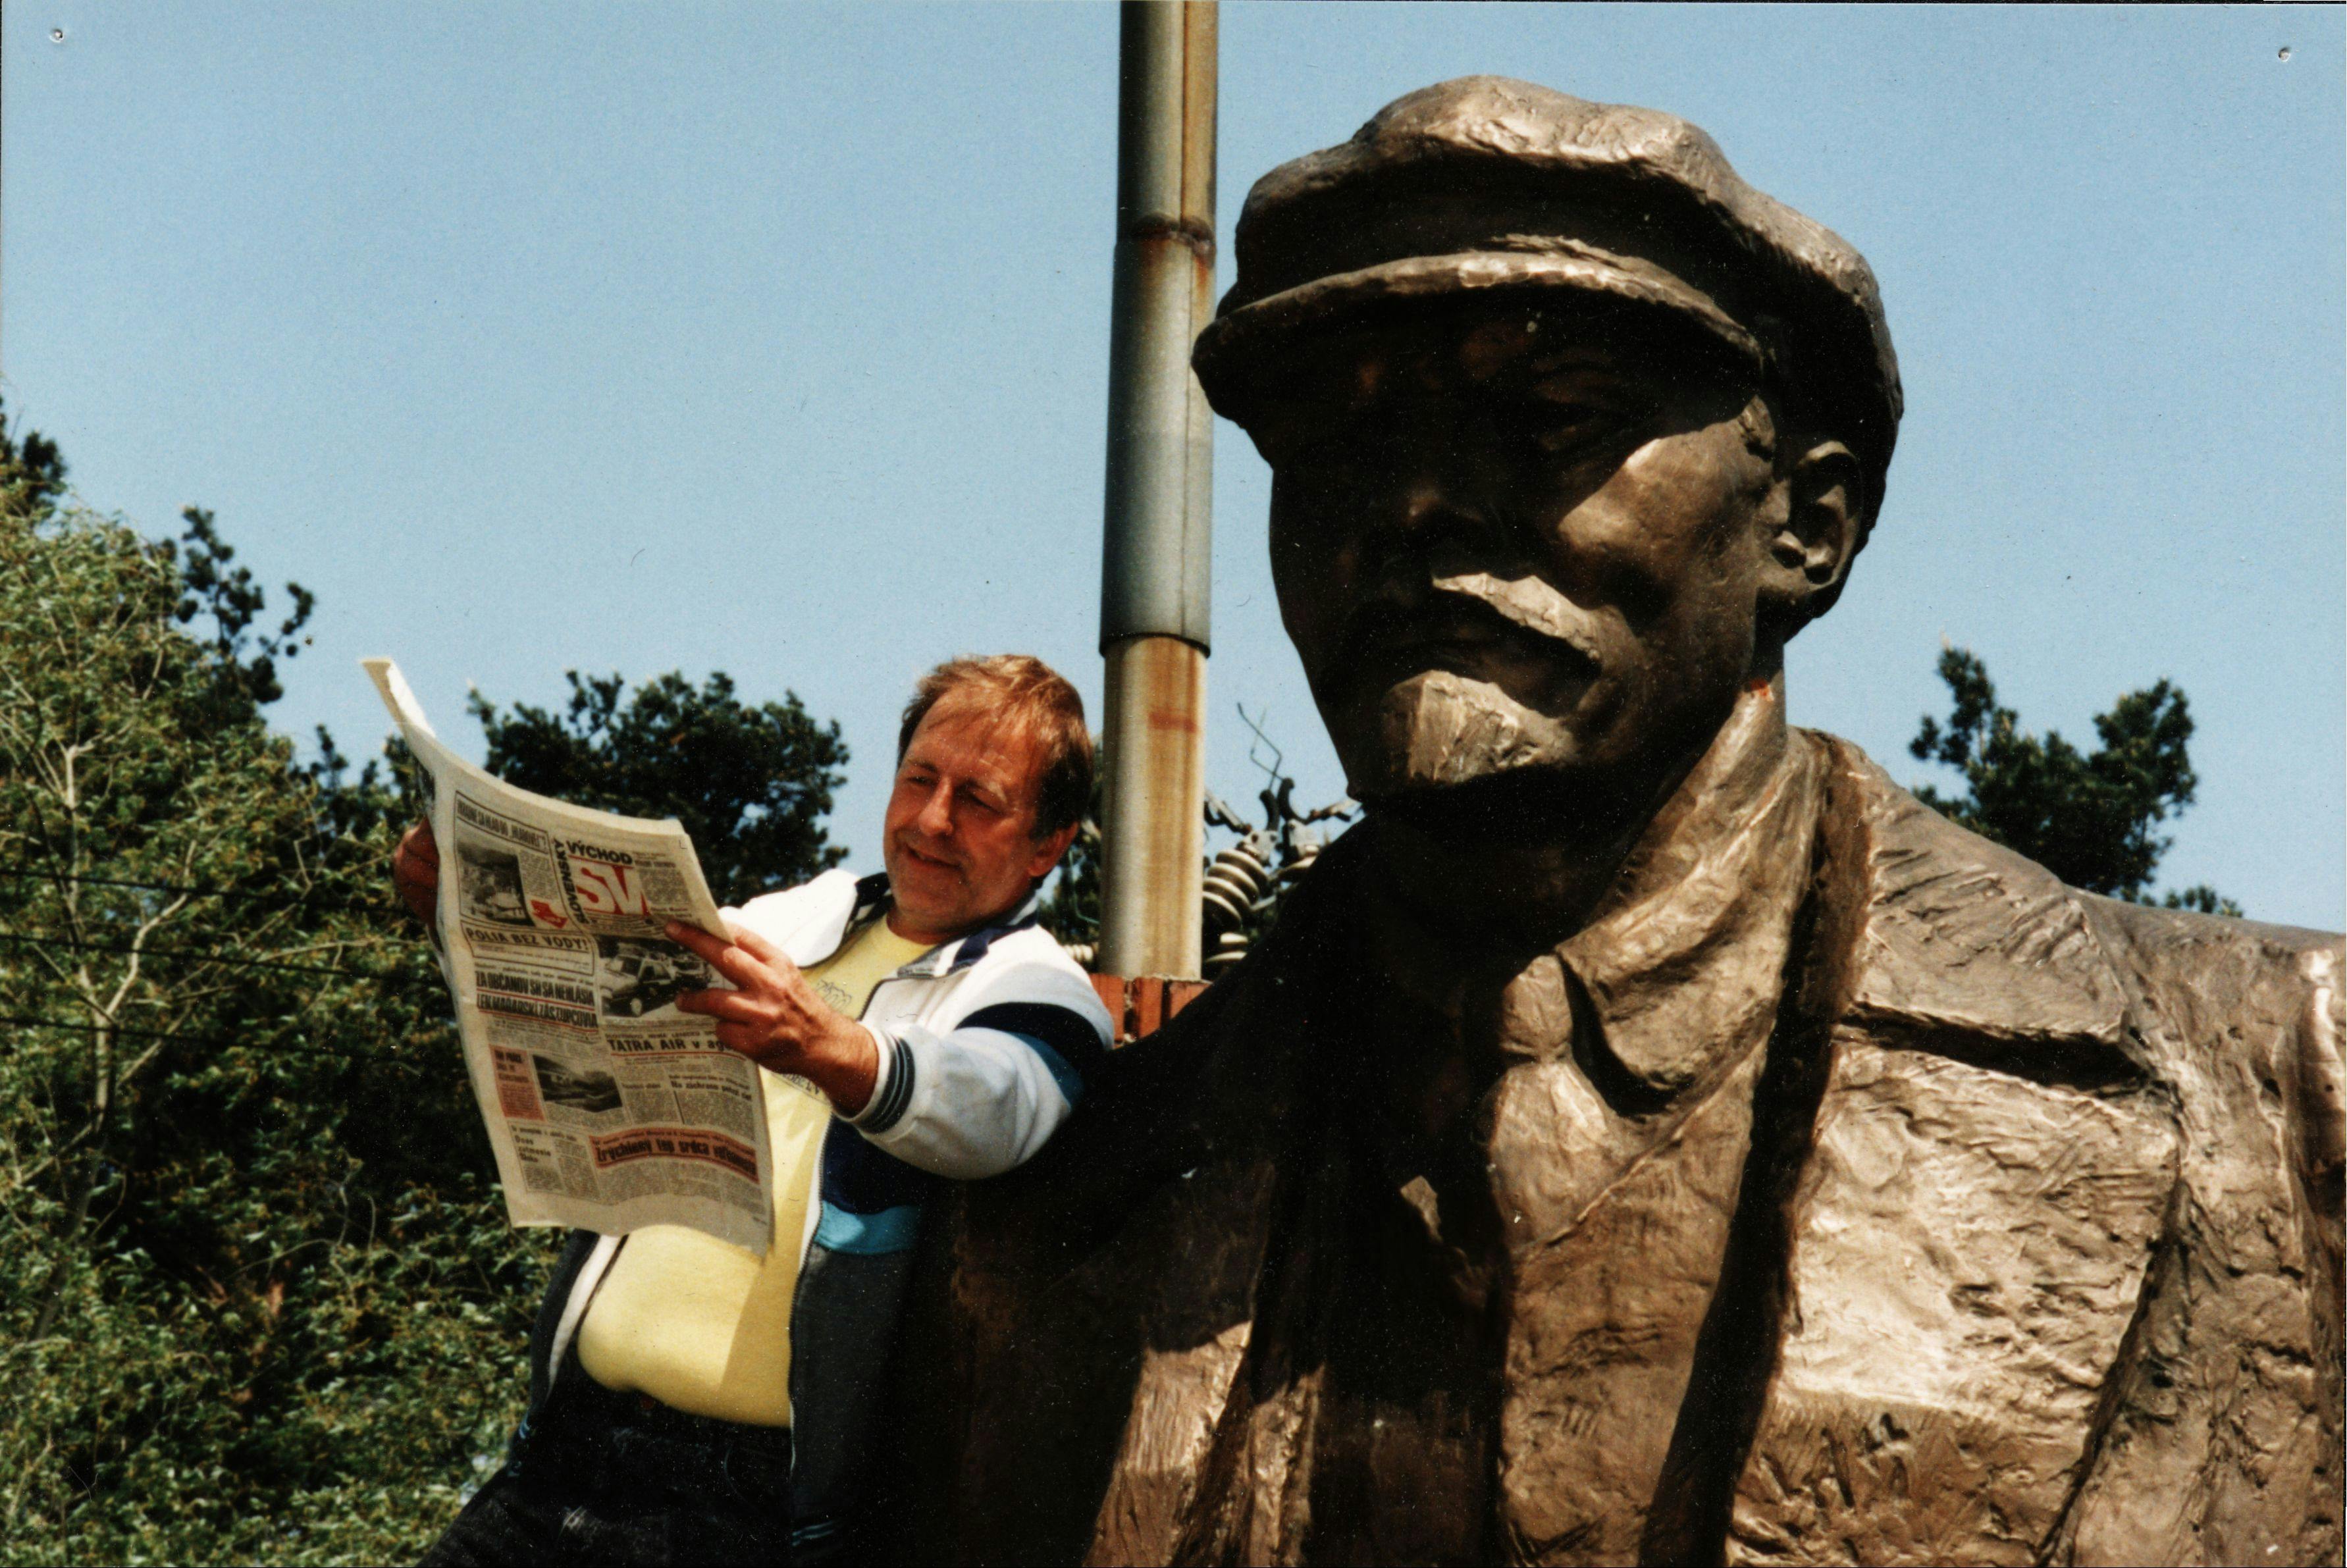 Lew reading a story about his Lenin in a local paper called Slovenský východ